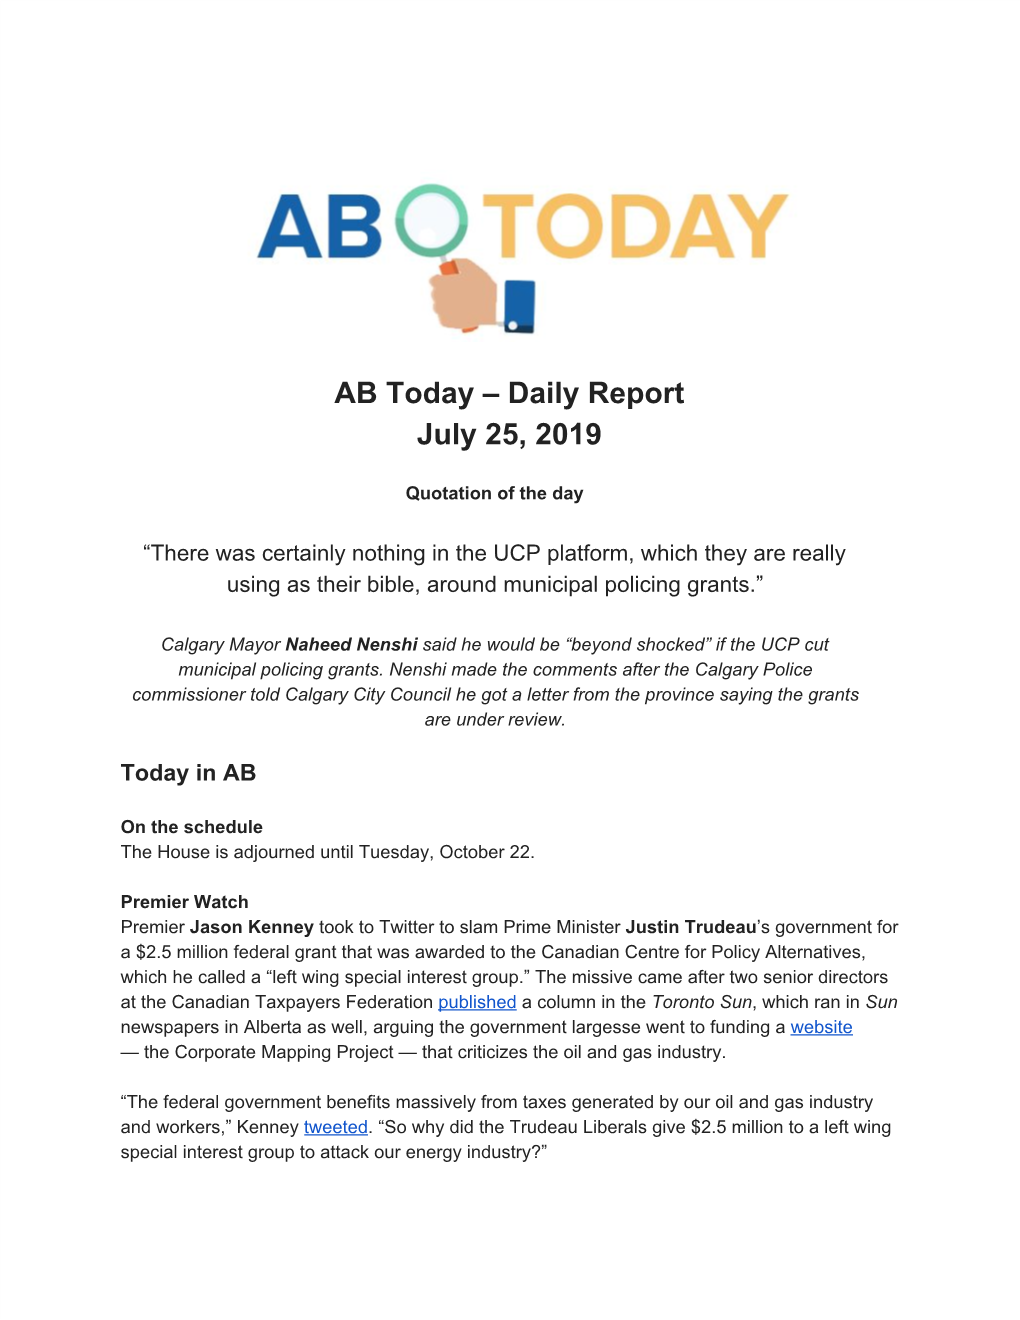 AB Today – Daily Report July 25, 2019